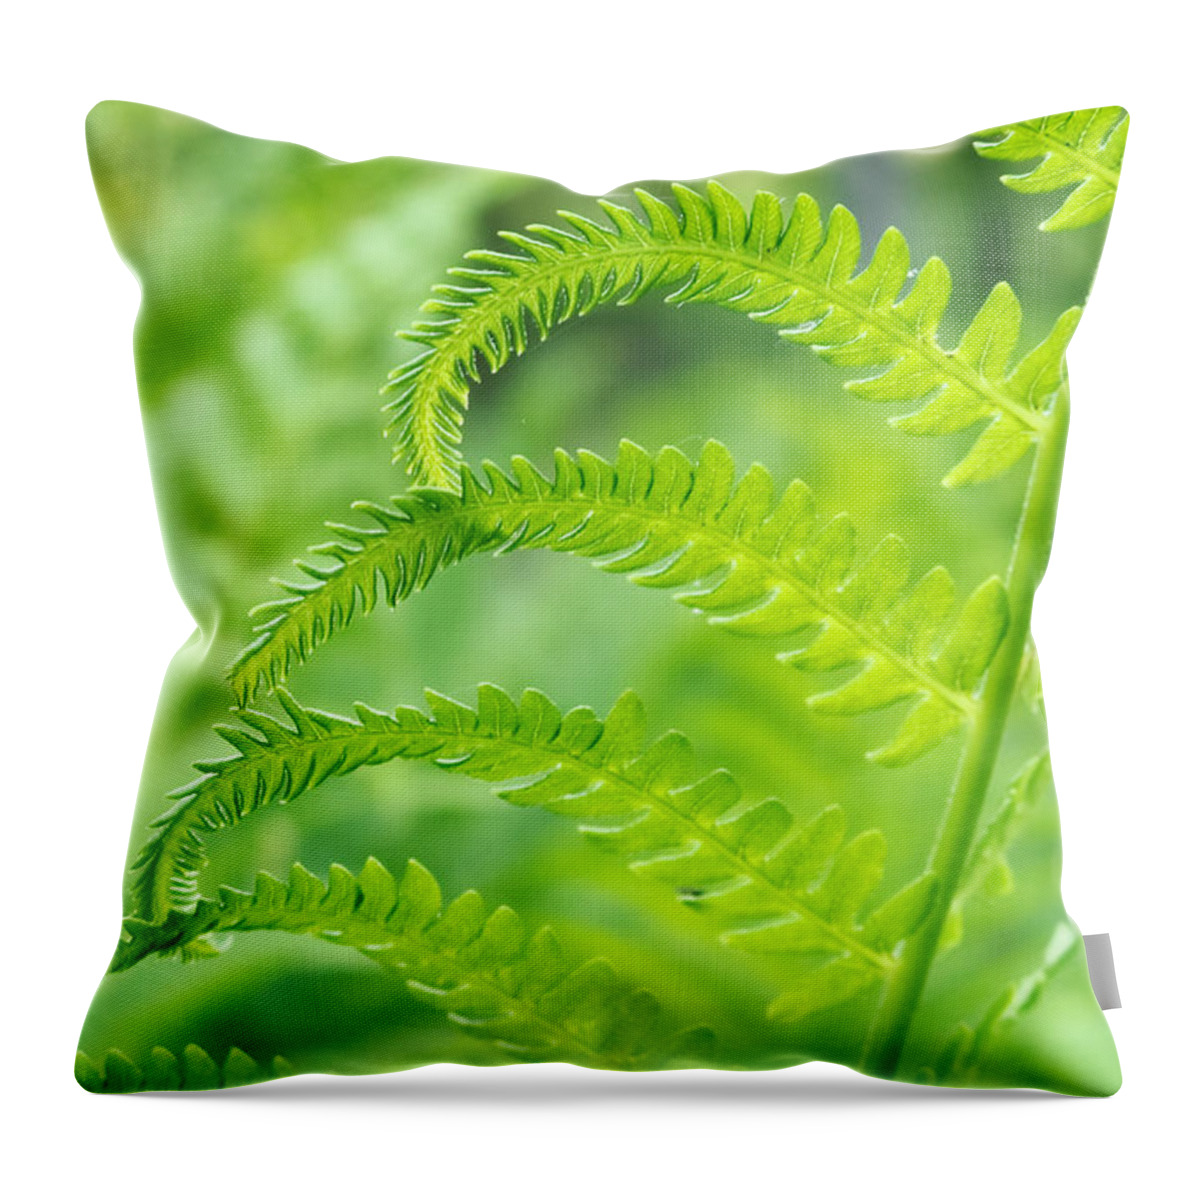 Flowers & Plants Throw Pillow featuring the photograph Spring Fern by Lars Lentz